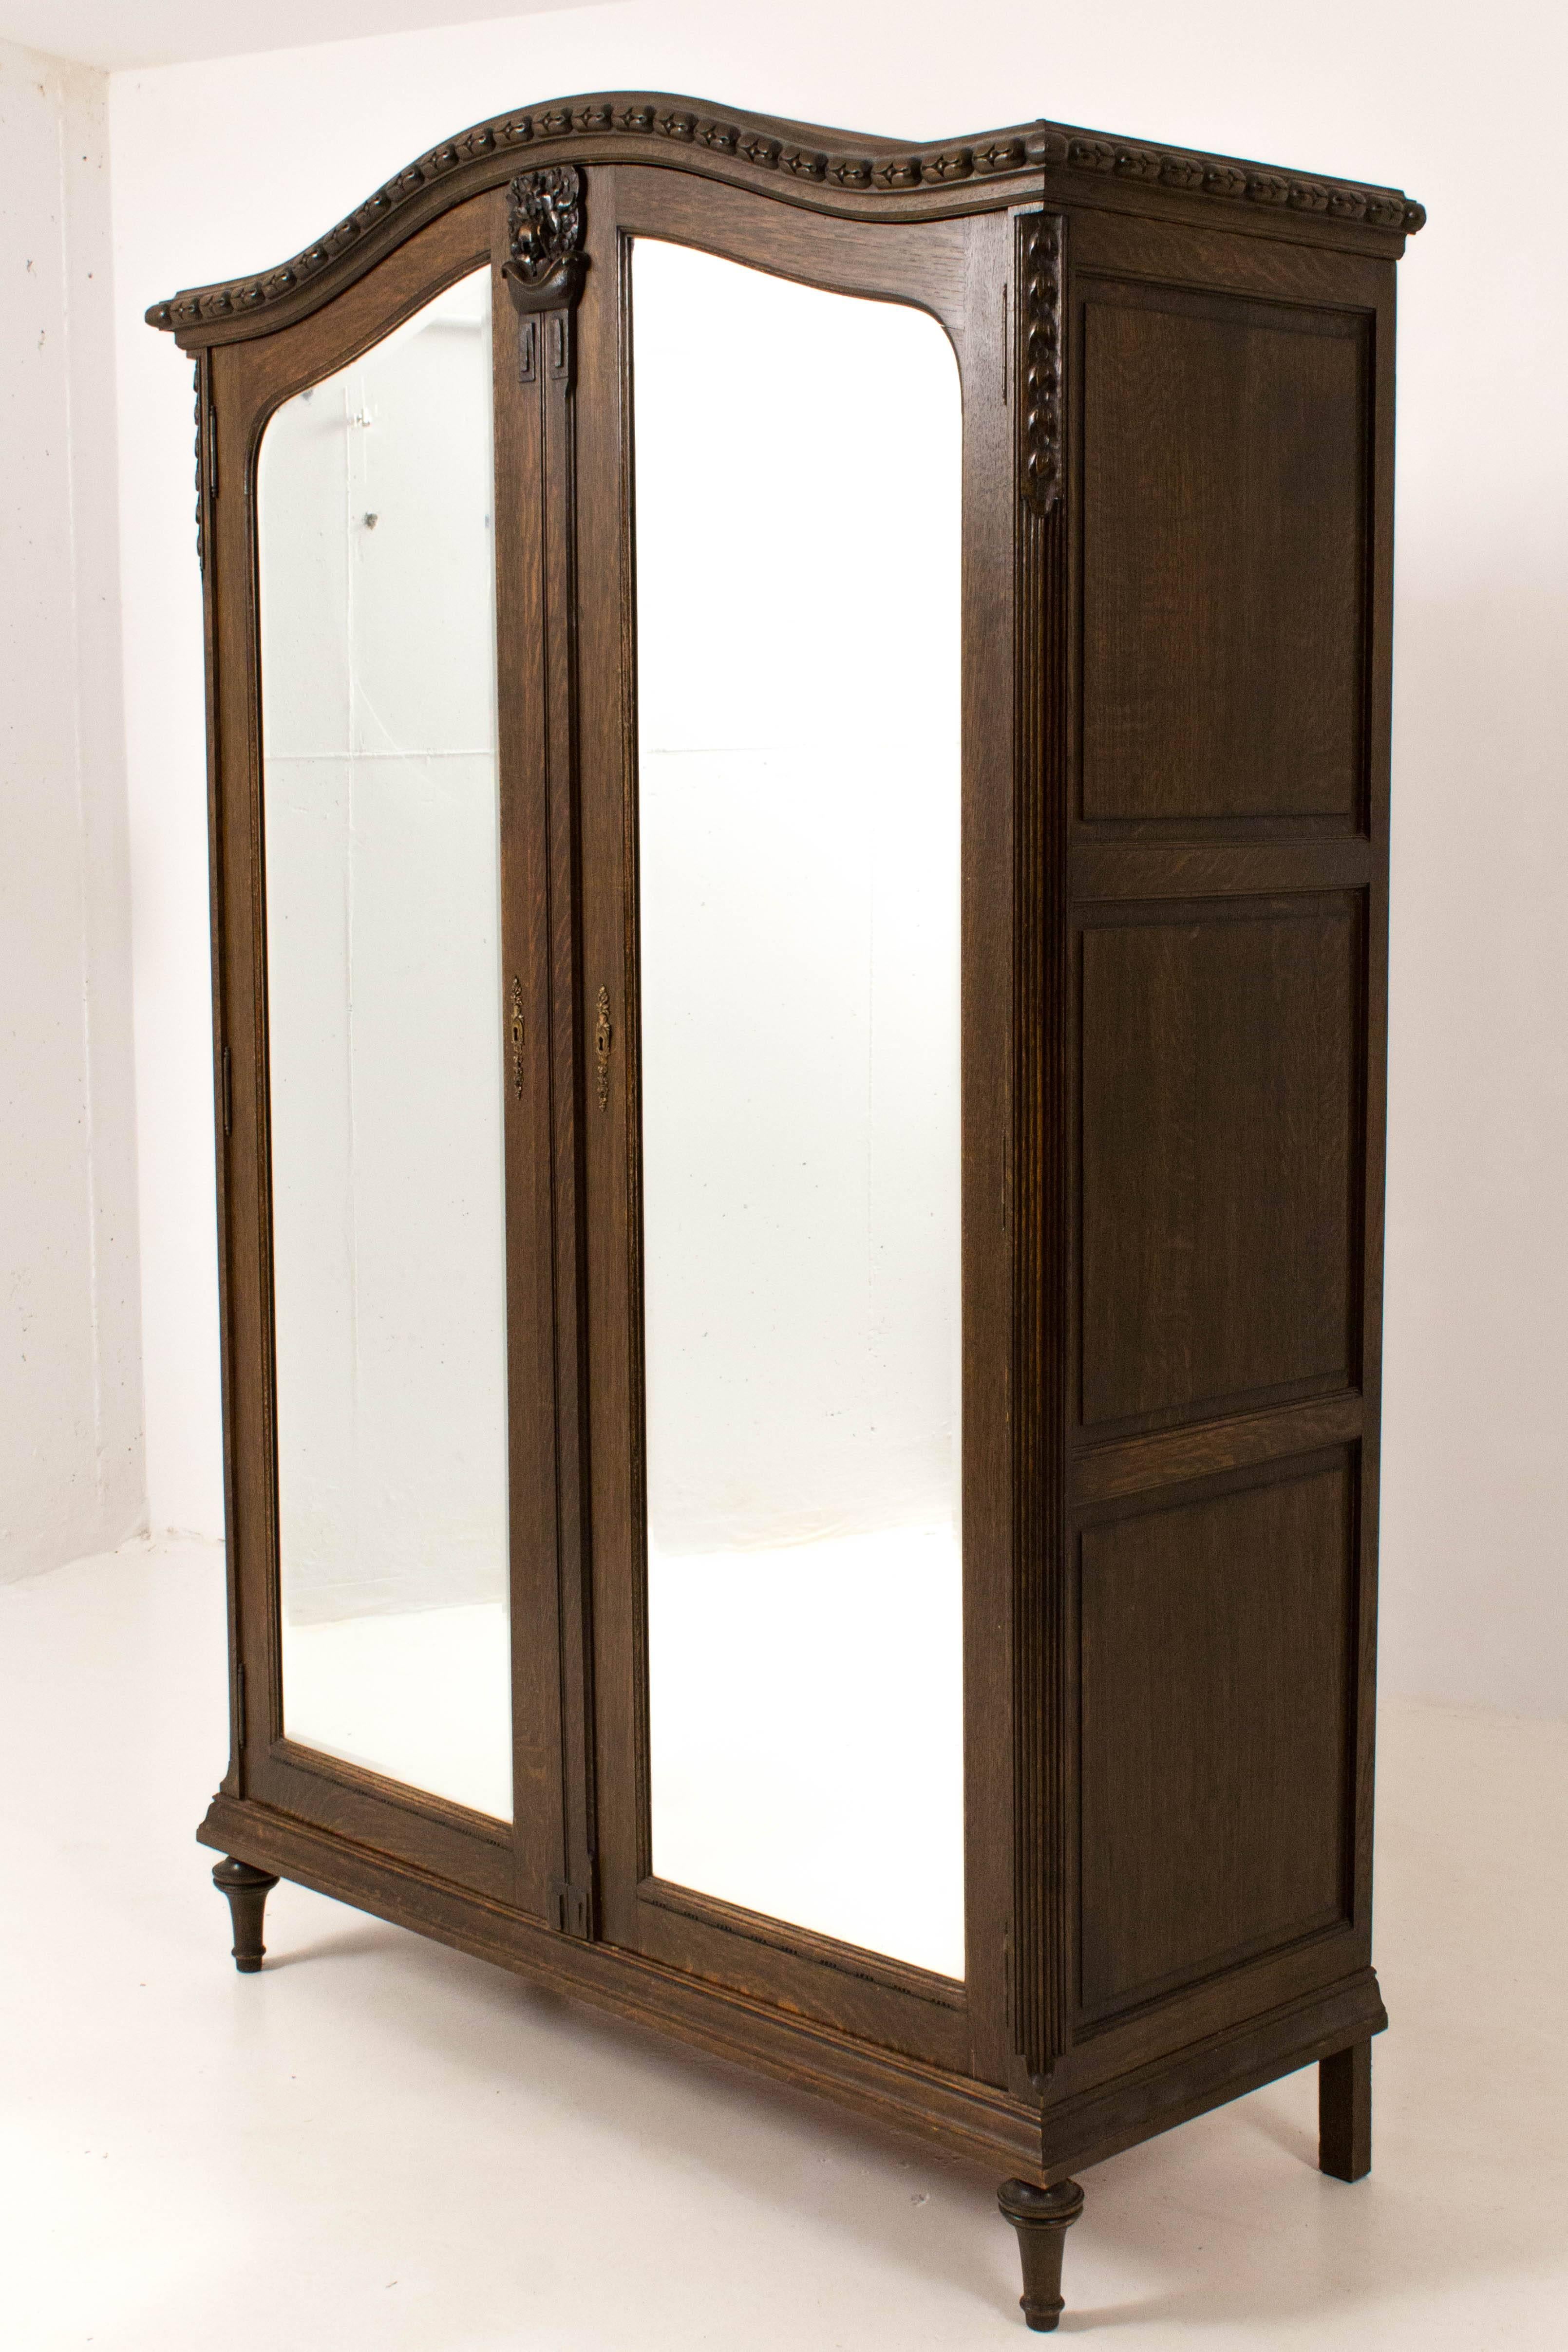 Stunning French Art Nouveau wardrobe with original glass doors 1900s.
Solid oak with nice carved details.
Lock and key are in good working order.
Wardrobe can be taken apart in ten pieces.
In good original condition with minor wear consistent